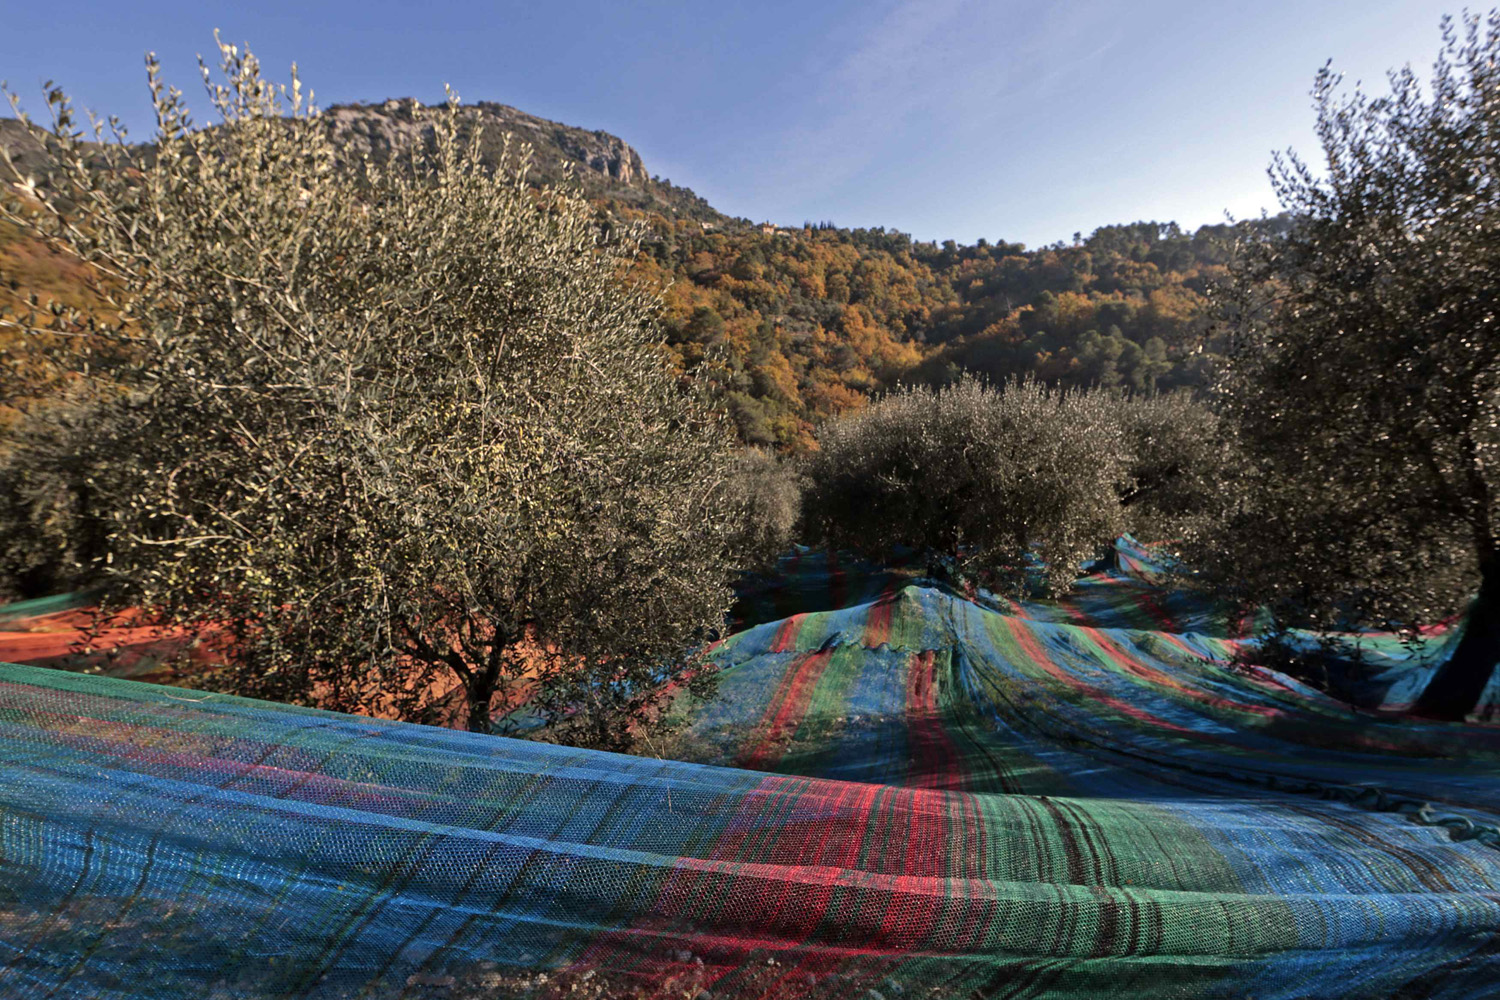 Multi-coloured nets used to harvest olives are spread out under olive trees near the village of Castagniers, north of Nice